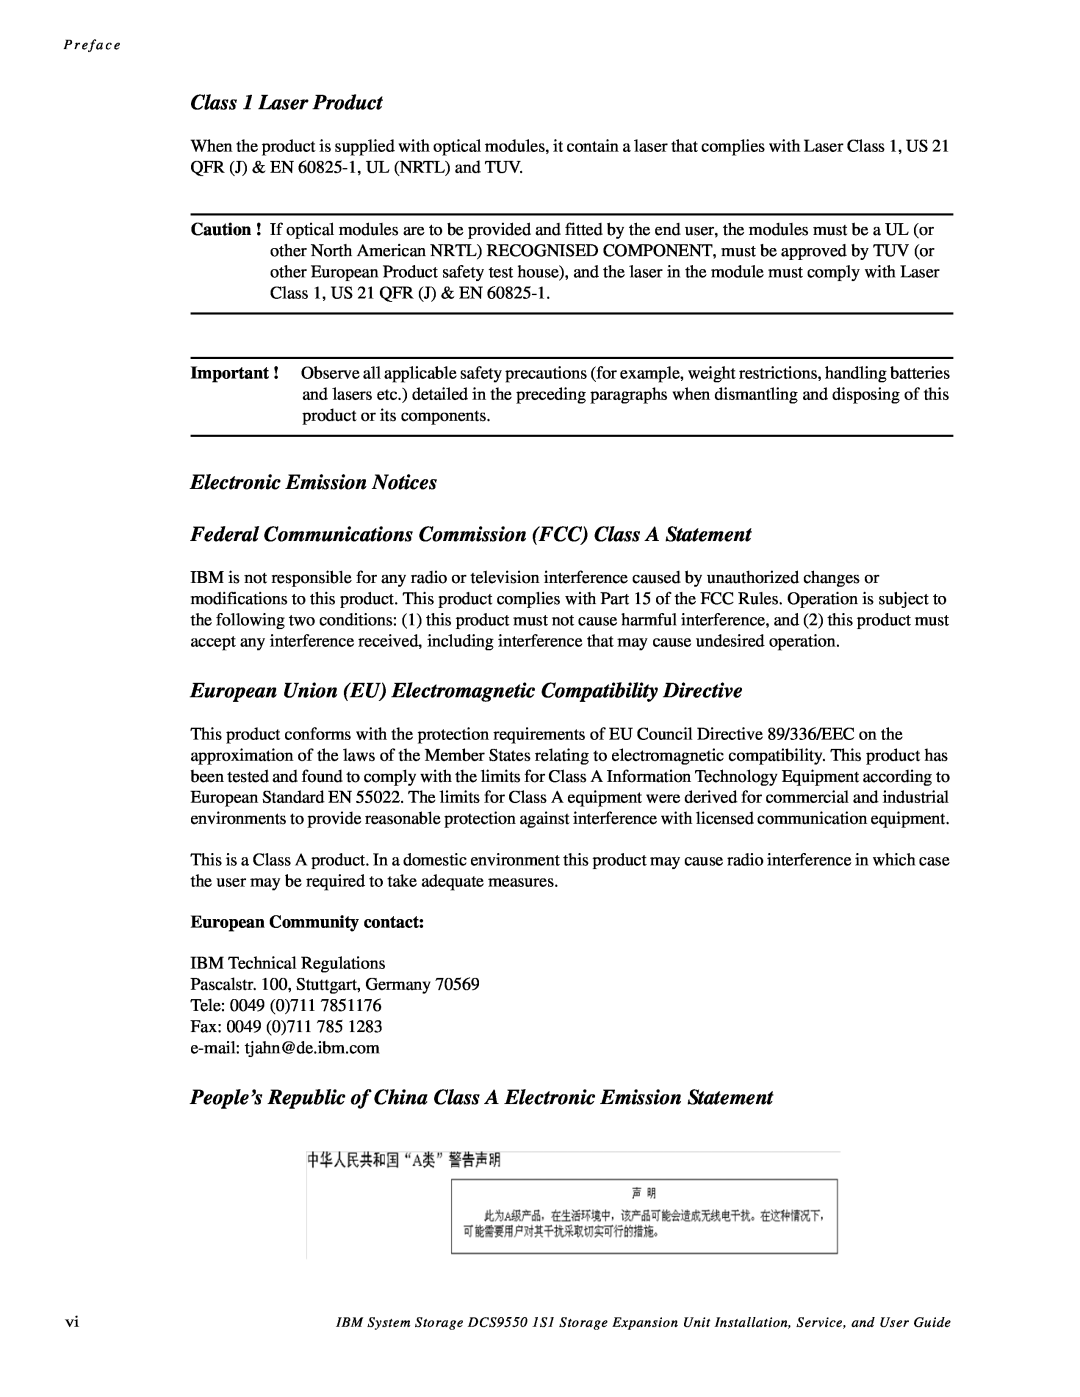 IBM DCS9550 1S1 manual Class 1 Laser Product, Electronic Emission Notices, European Community contact 